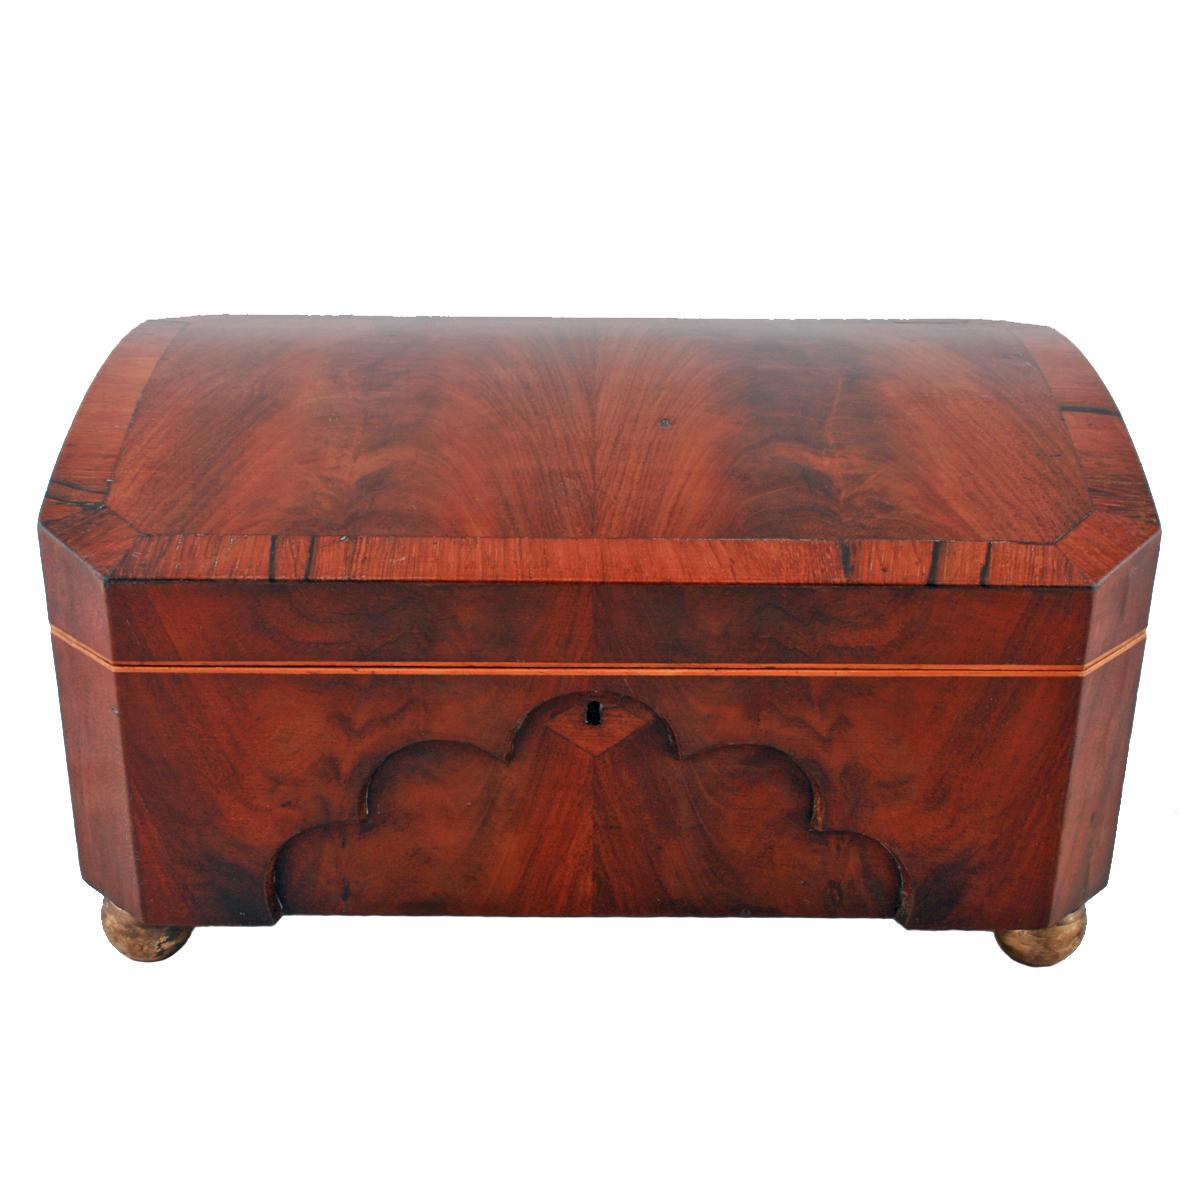 Early 19th century mahogany sewing box

An early 19th century continental mahogany sewing or needlework box.

The box has a domed lid that has flamed mahogany and rosewood cross banding, while the interior has a lift out fitted tray to hold